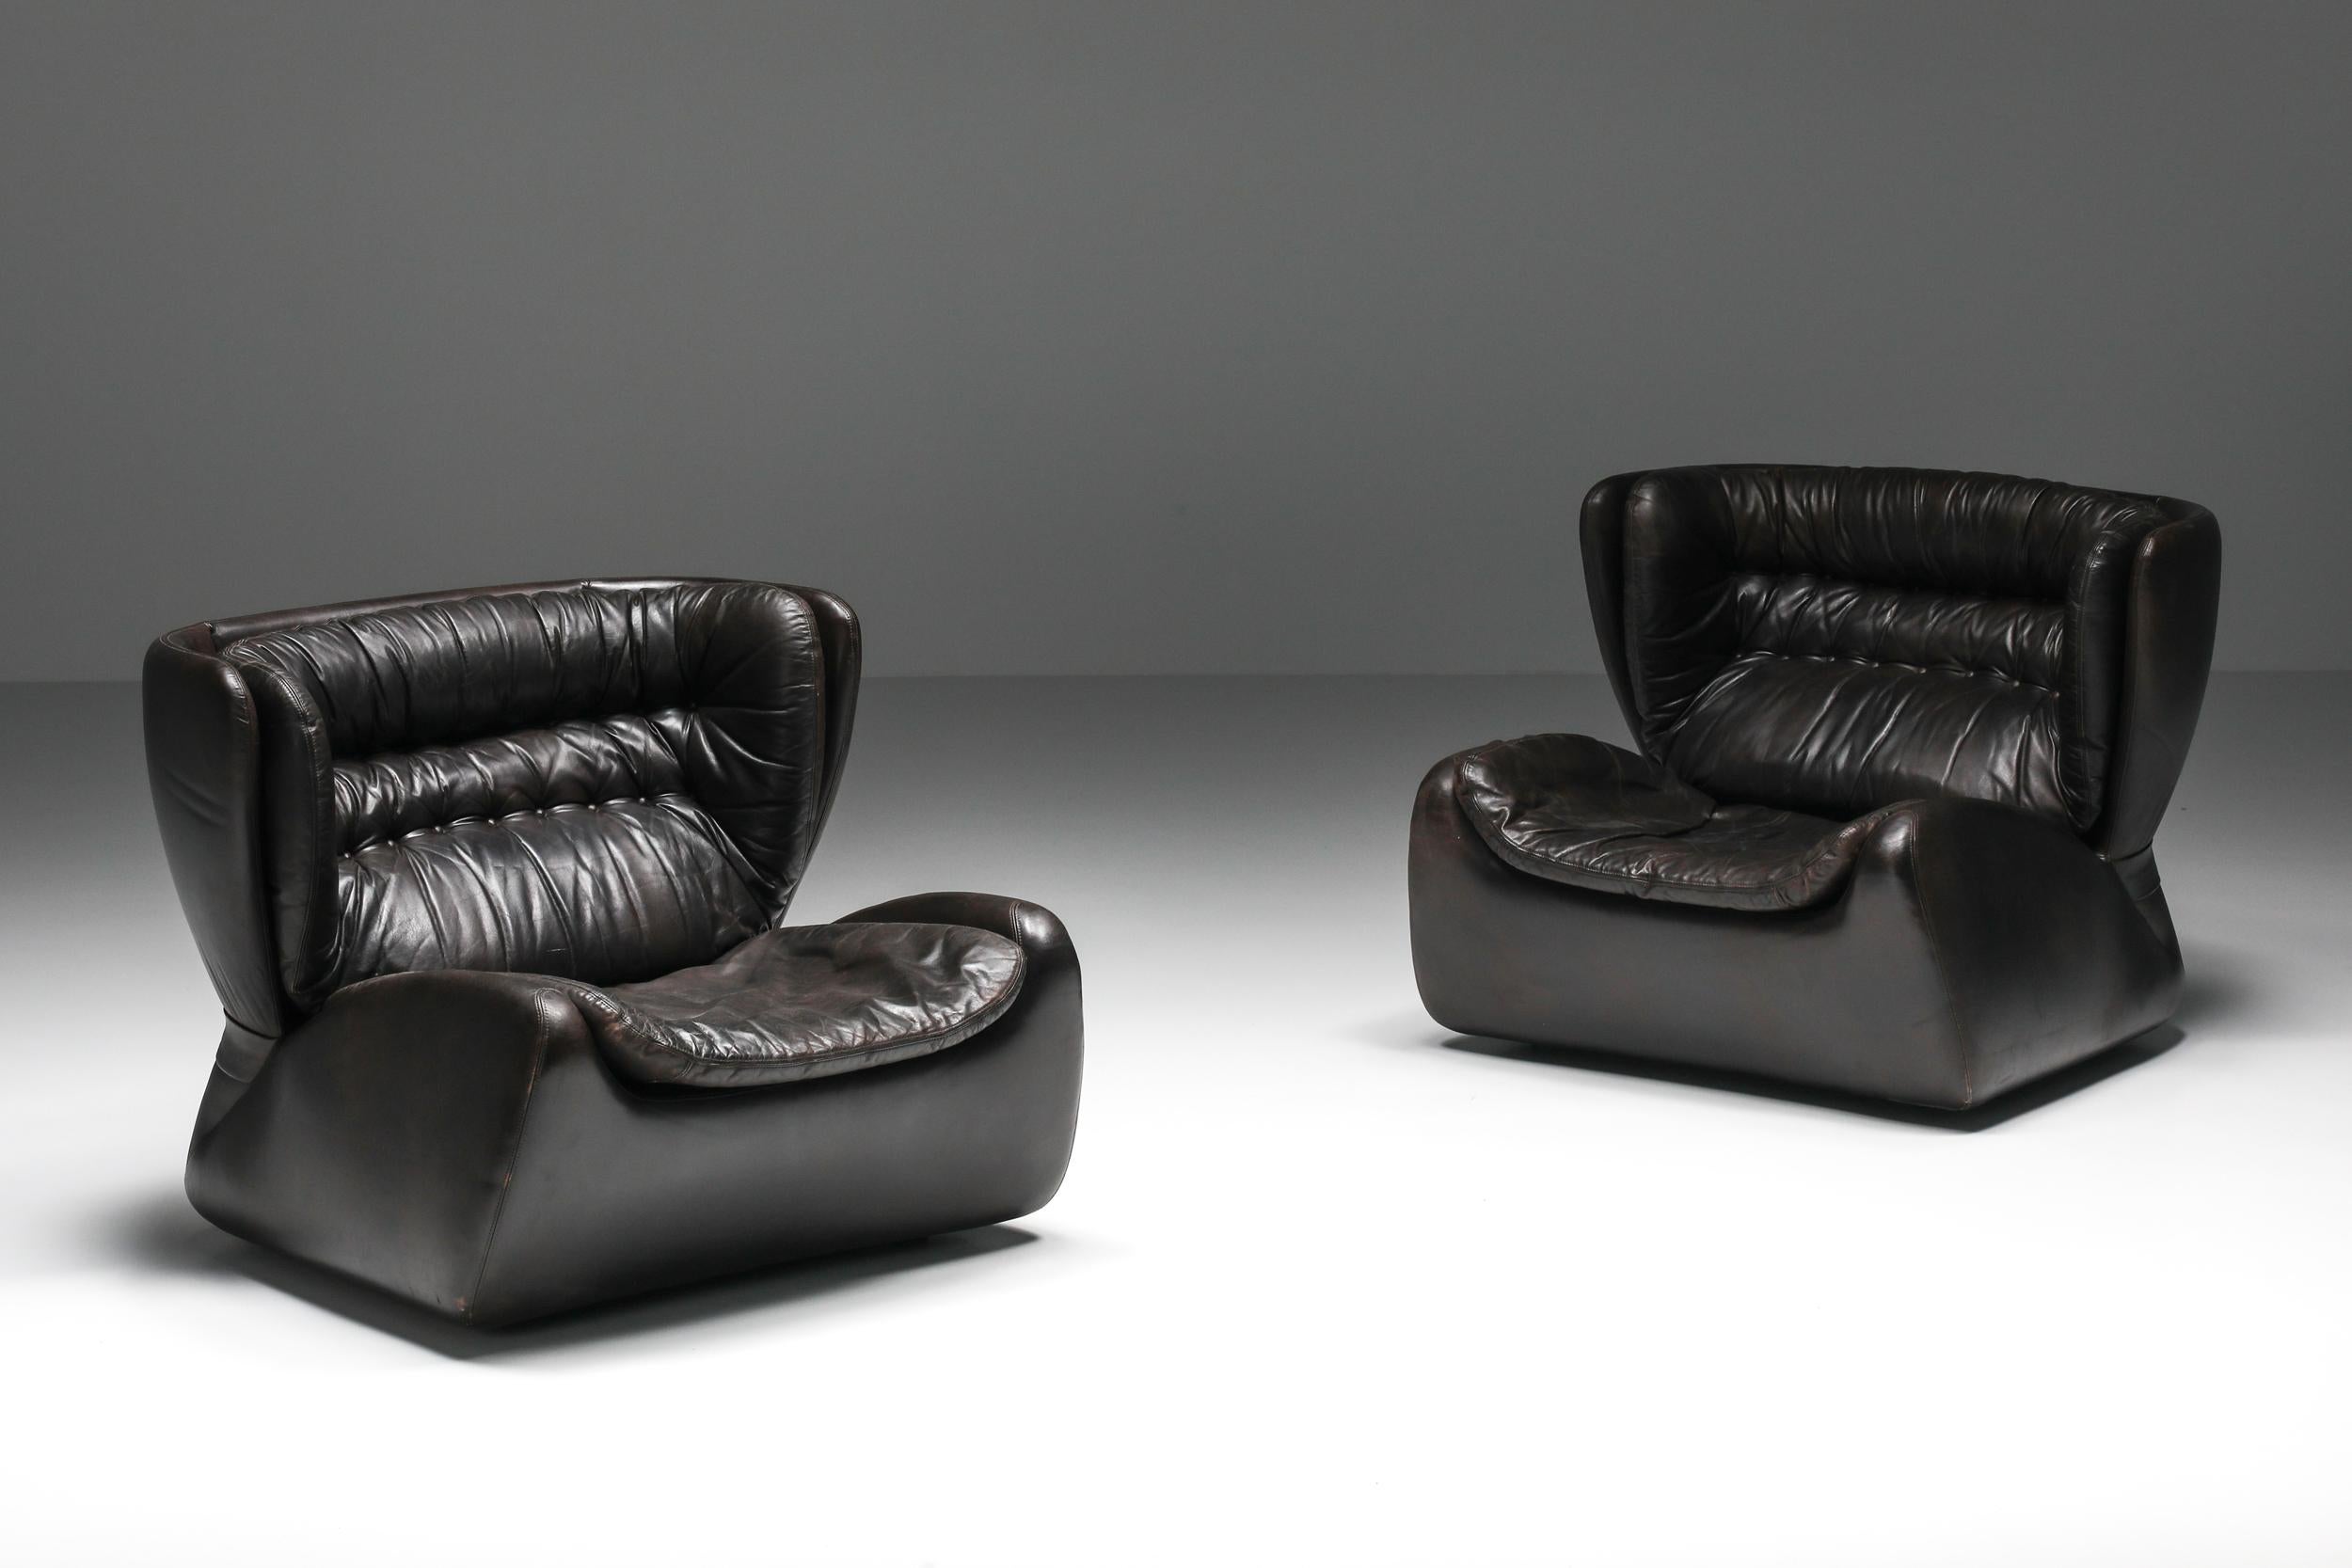 Post-Modern Belgian Design, Dark Brown 'Pasha' Lounge Chairs by Durlet, 1970's For Sale